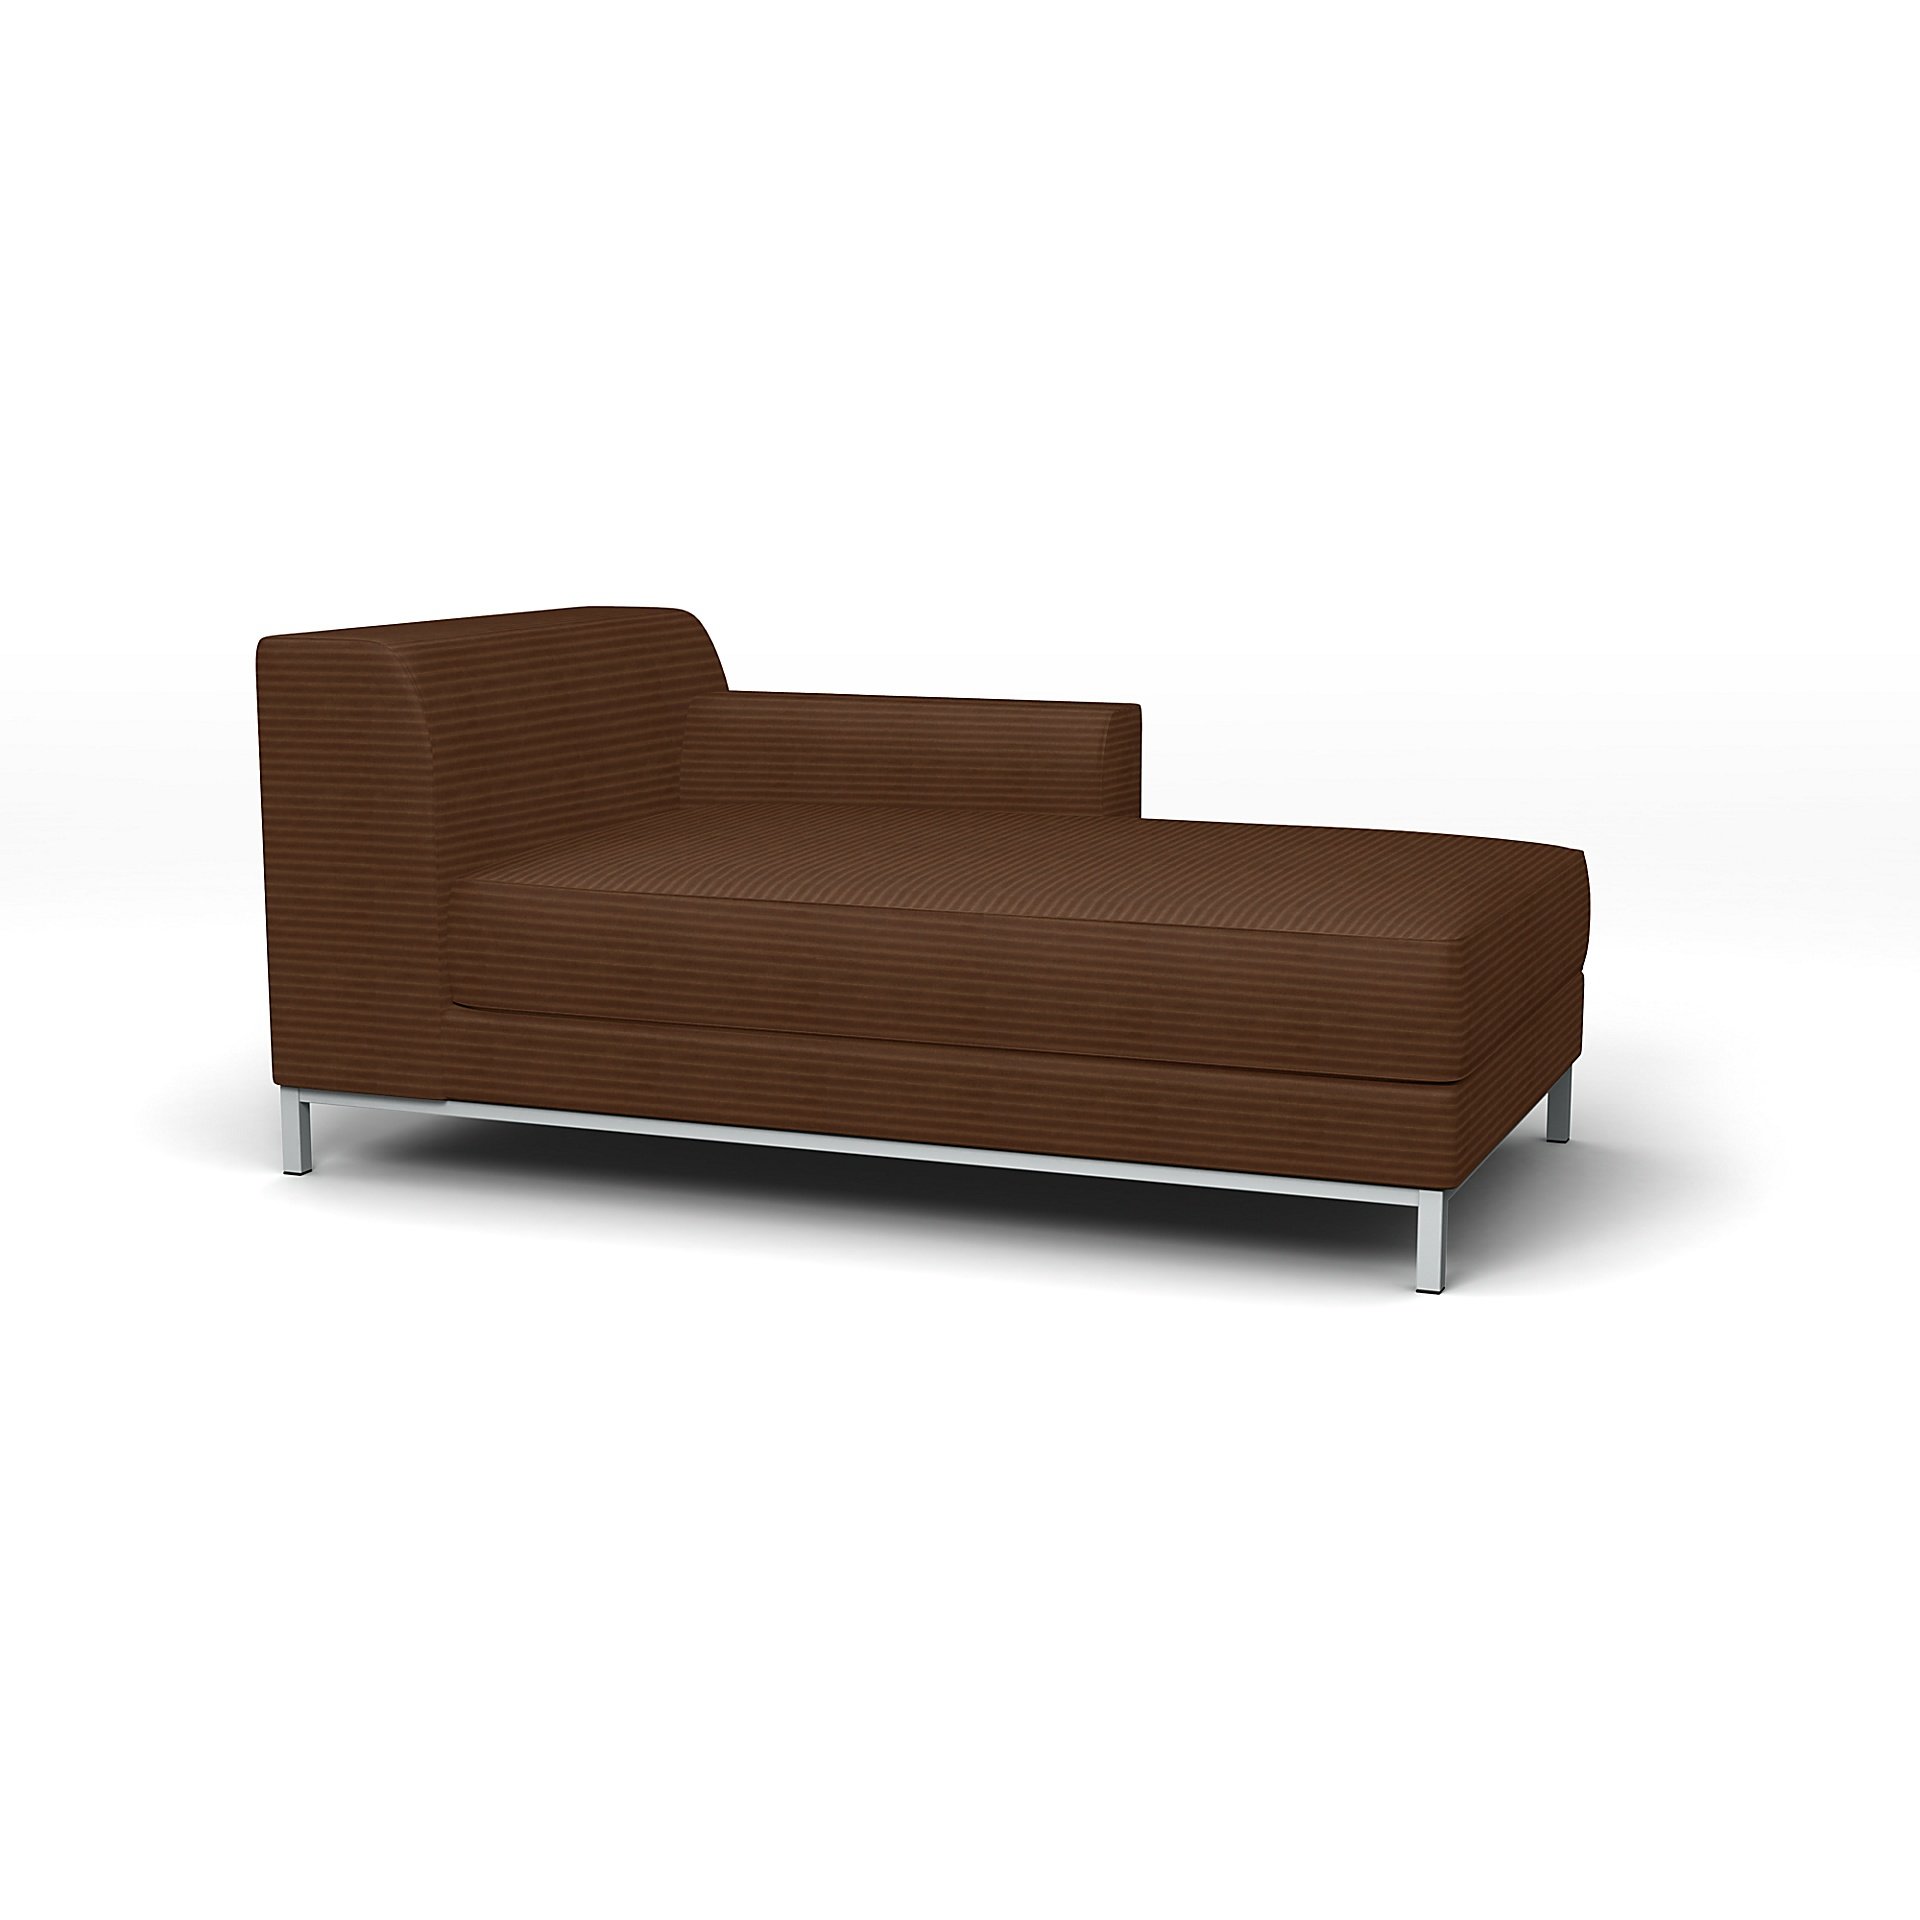 IKEA - Kramfors Chaise Longue with Right Arm Cover, Chocolate Brown, Corduroy - Bemz